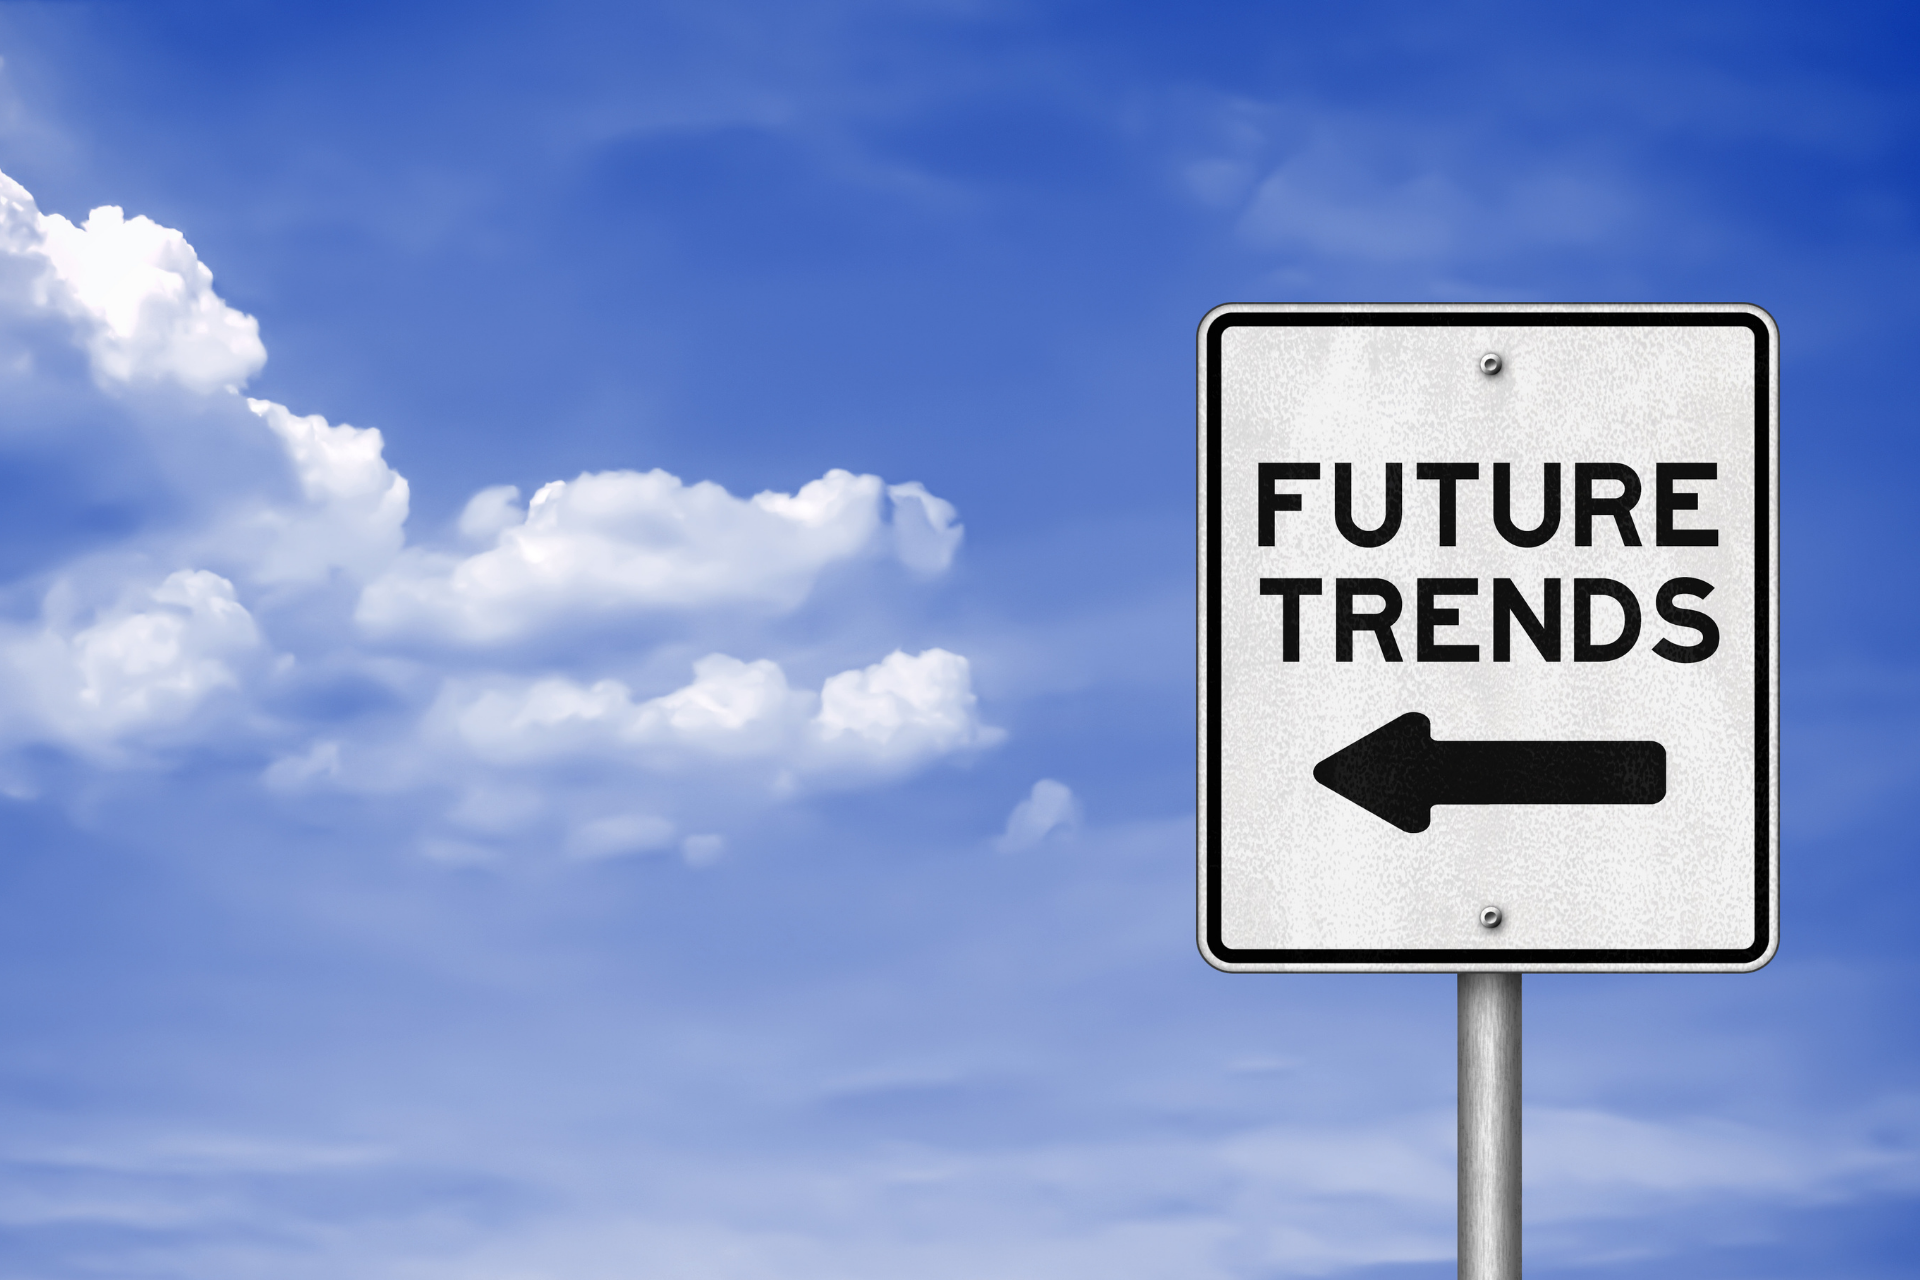 Image with a sign saying future trends